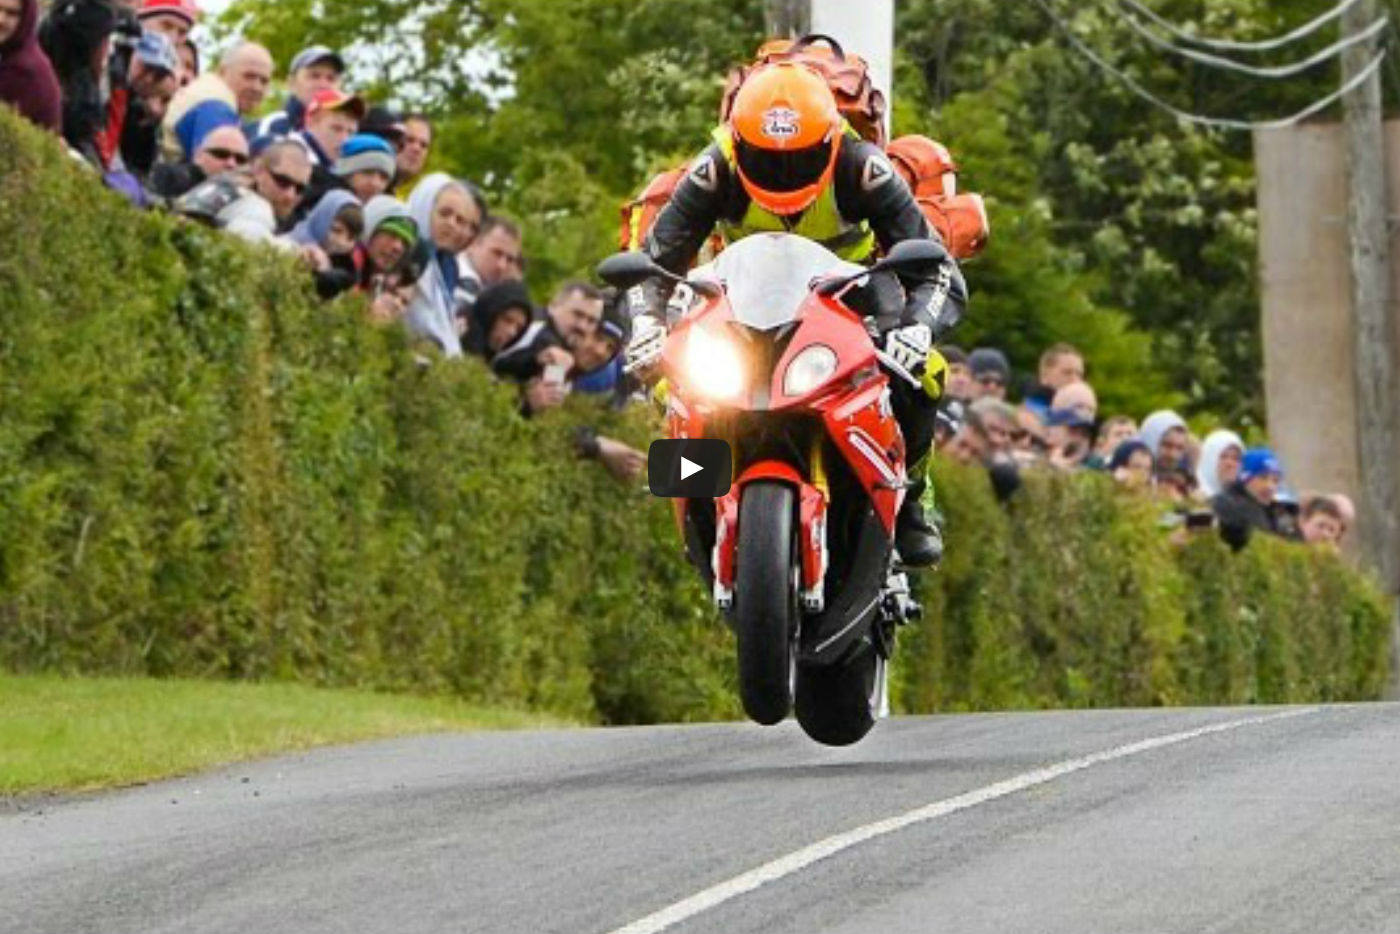 'Flying doctor' John Hinds gives an illuminating talk about his work